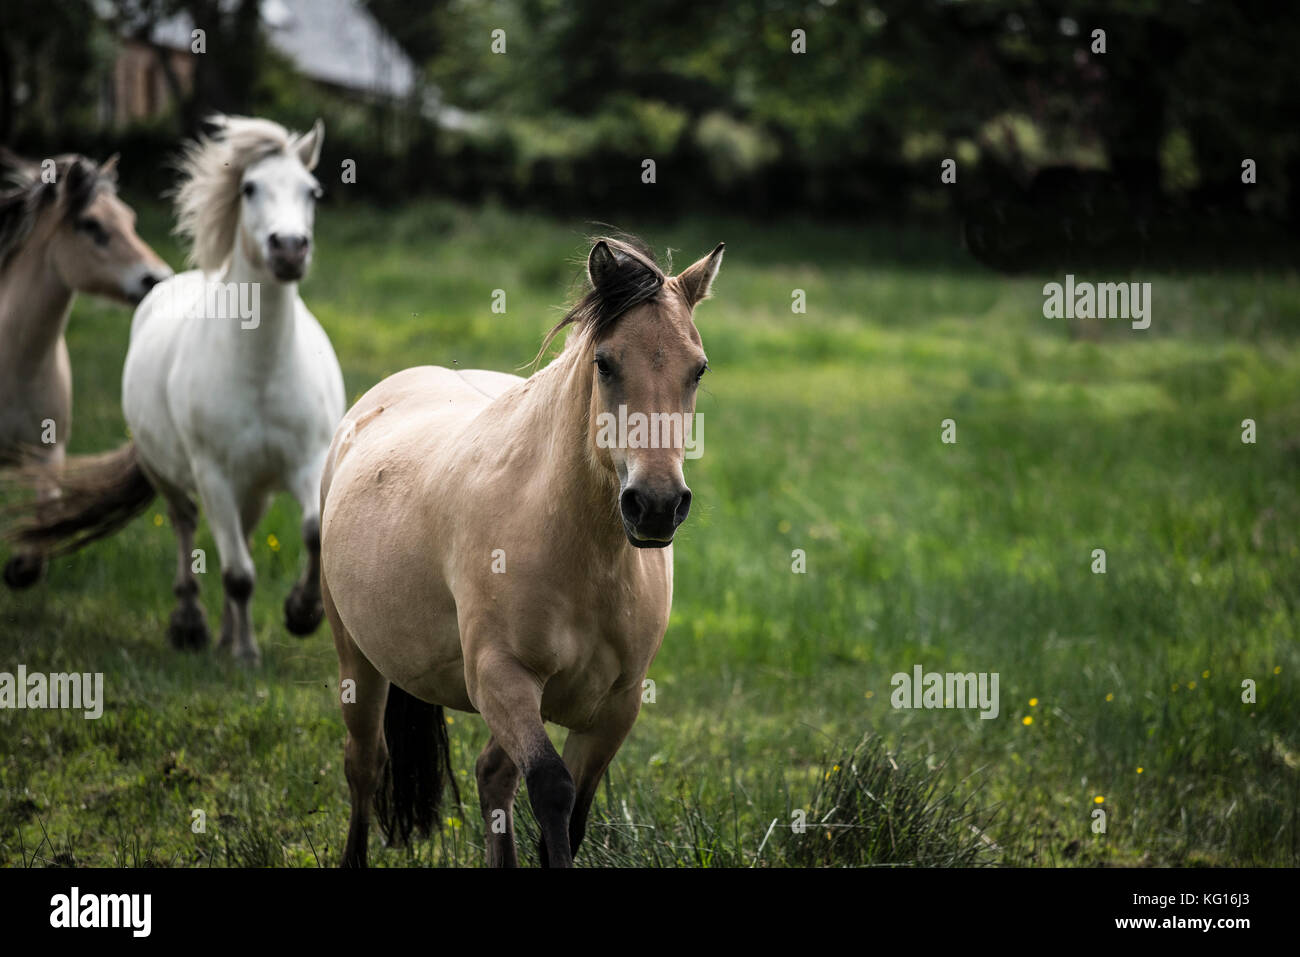 Horses running together in the French countryside Stock Photo